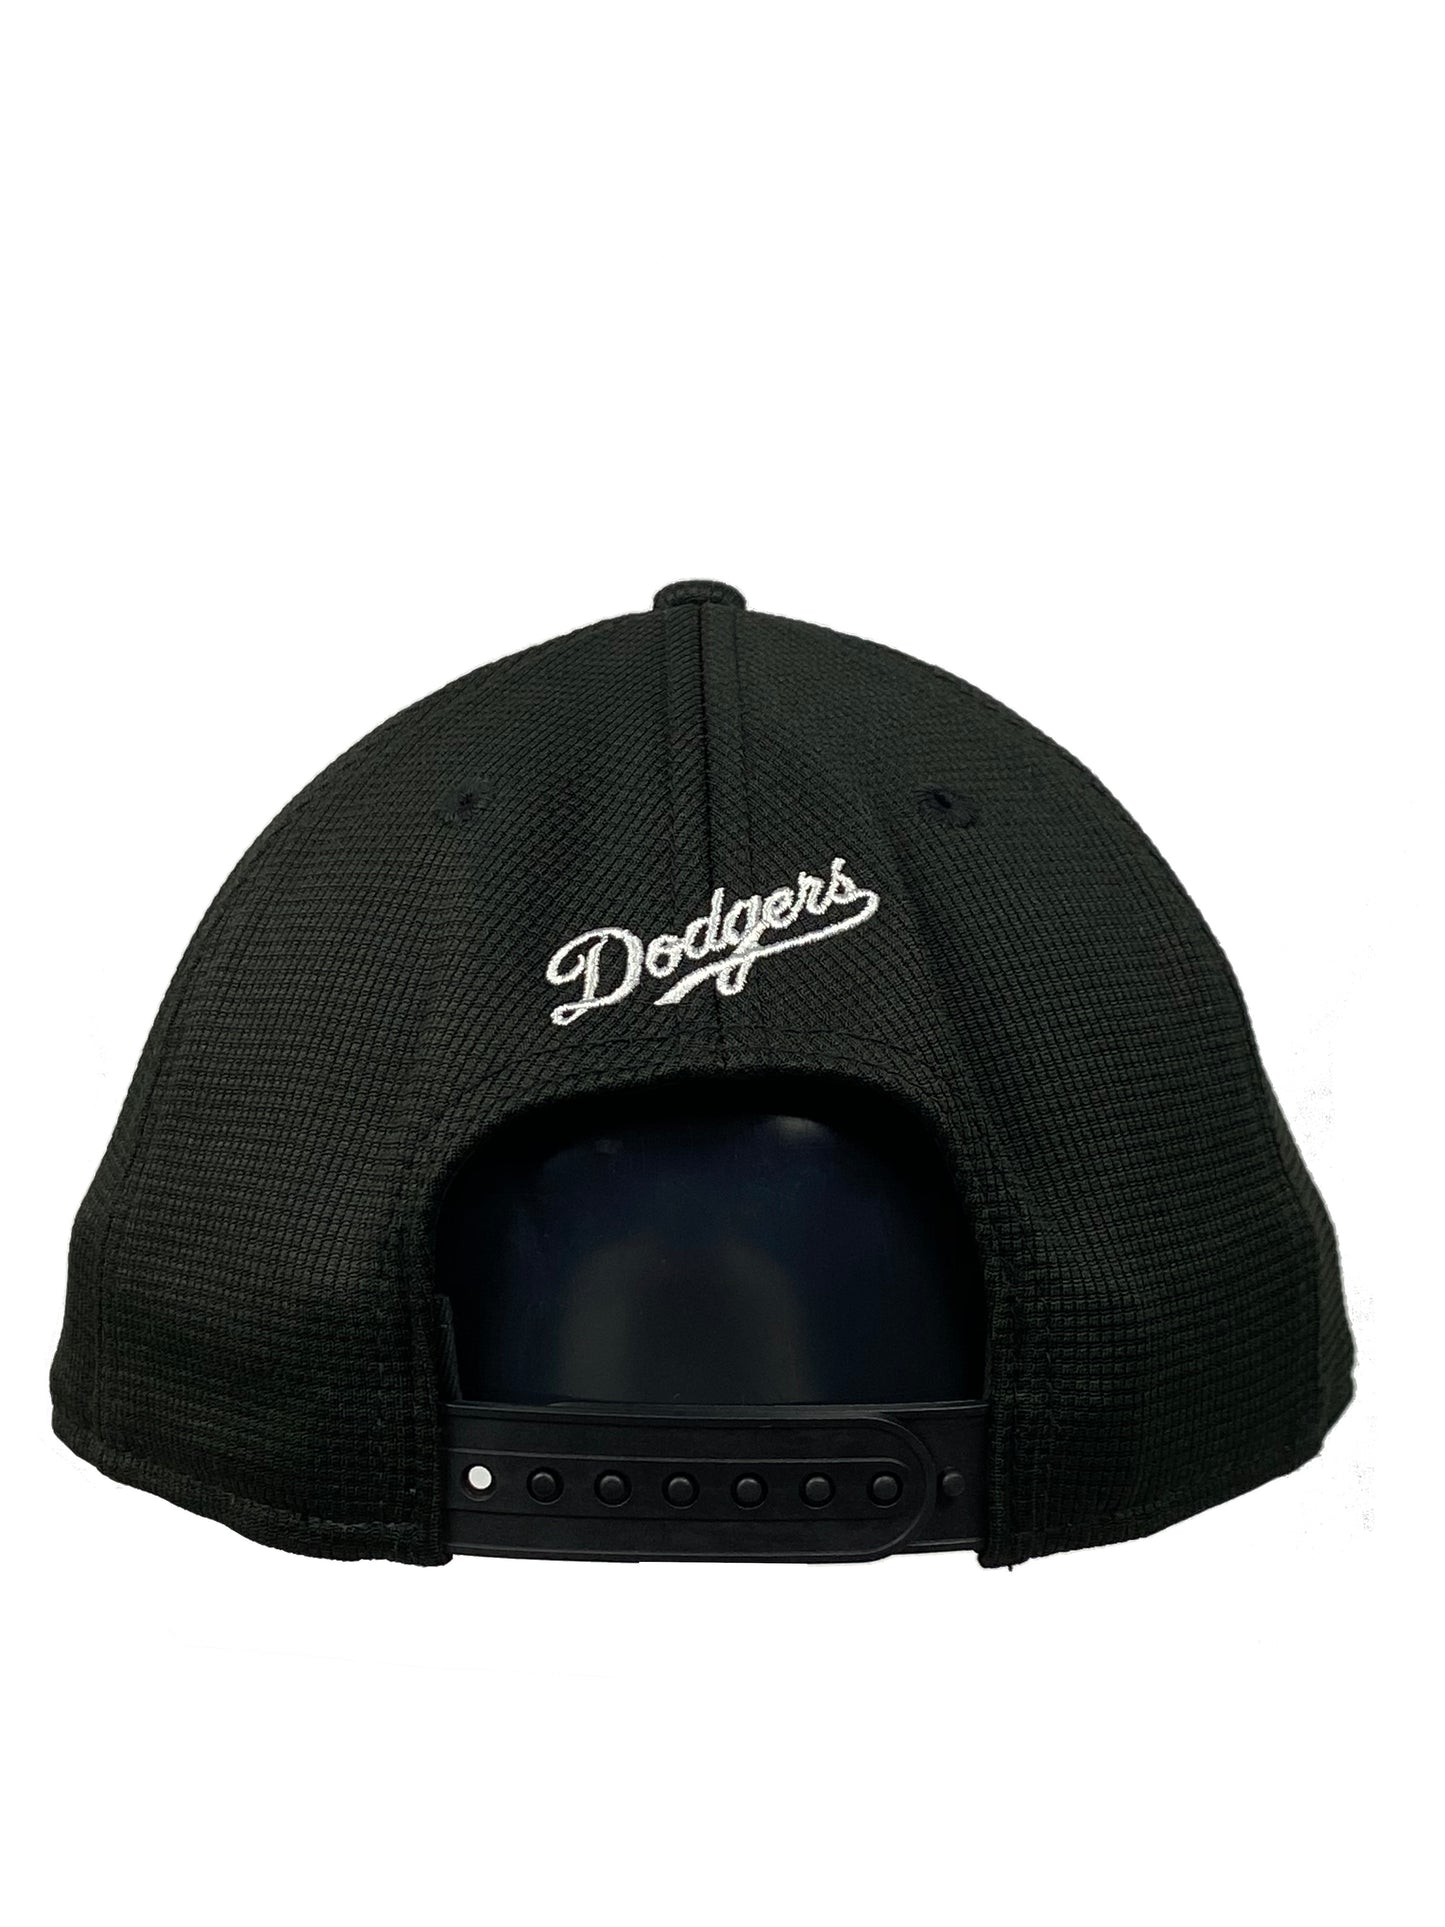 LOS ANGELES DODGERS CLUBHOUSE 950 BLACK/WHITE